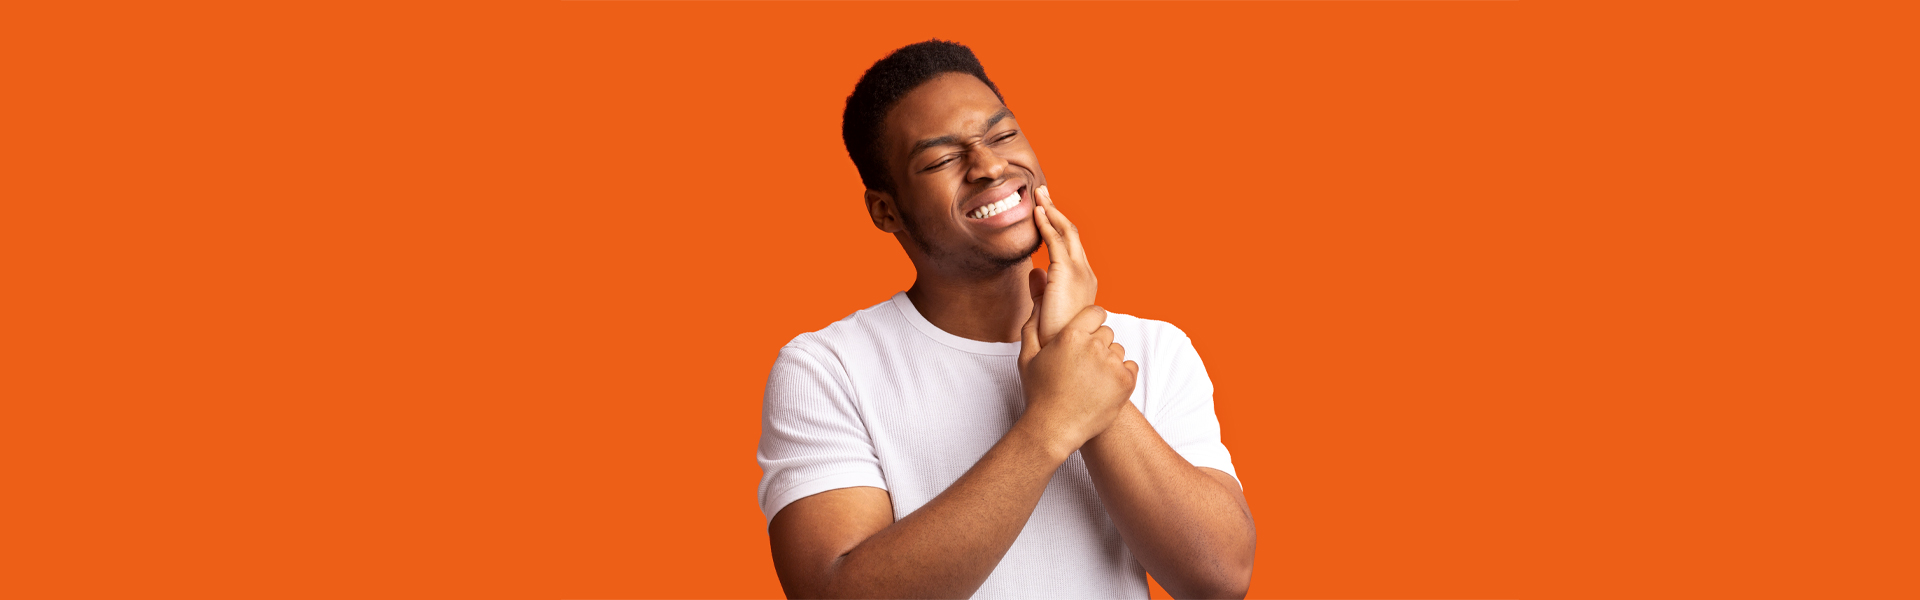 Does a Swollen Jaw Indicate the Need for Emergency Dental Treatment?